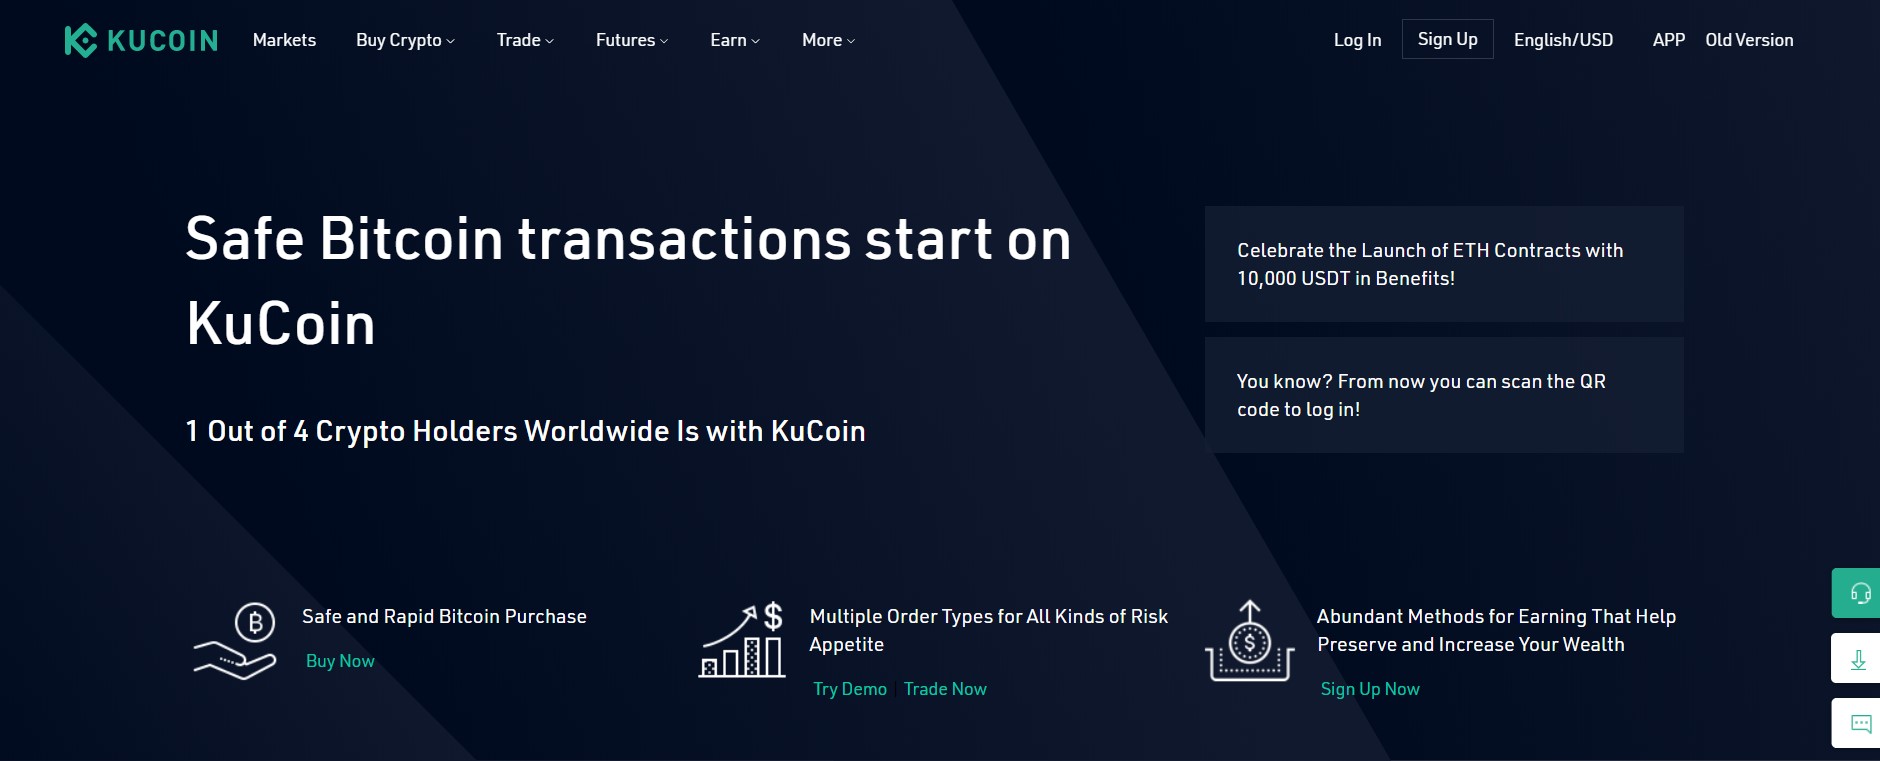 Find pricing, reviews and other details about KuCoin